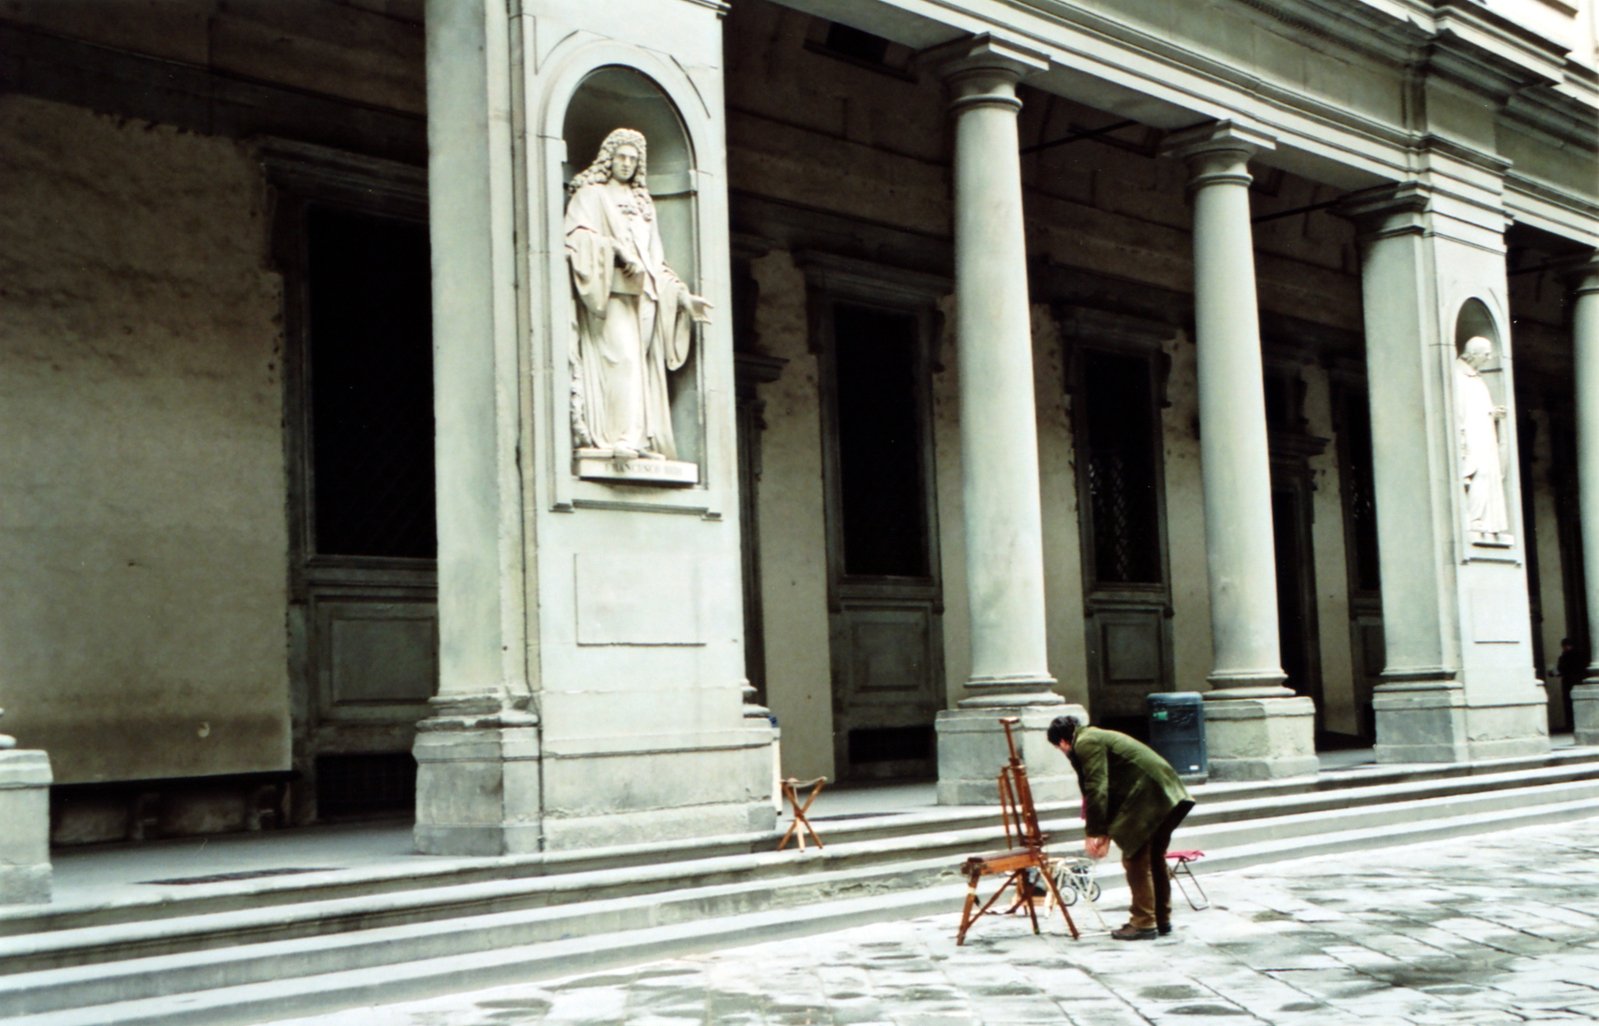 a man working in front of an old building with a statue